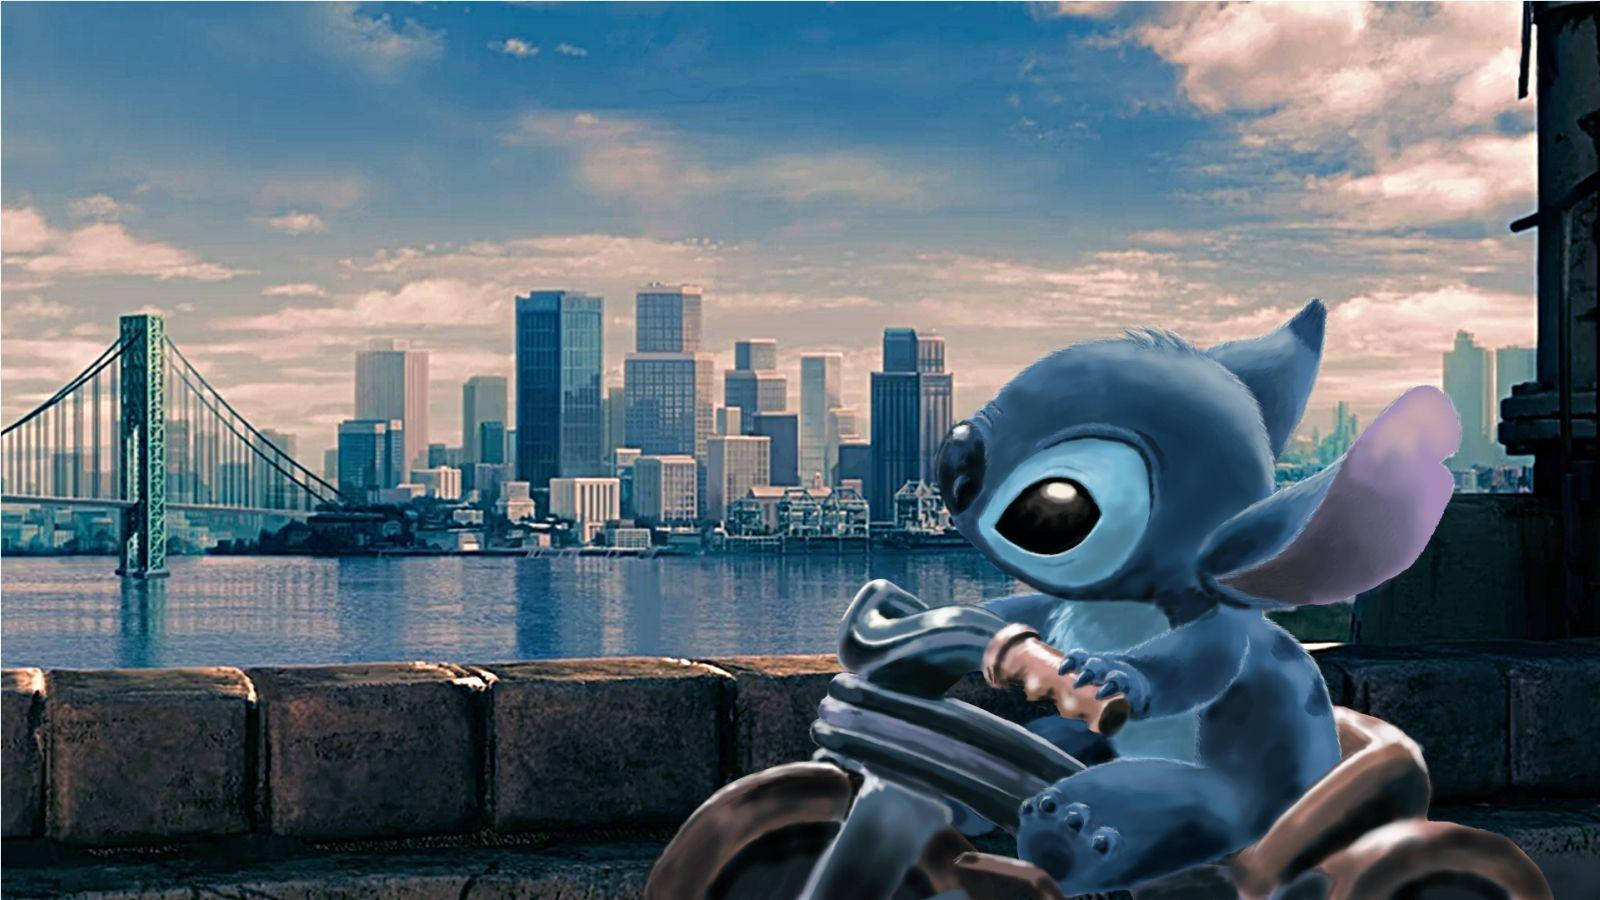 Lilo Stitch Cycling In The City Wallpaper